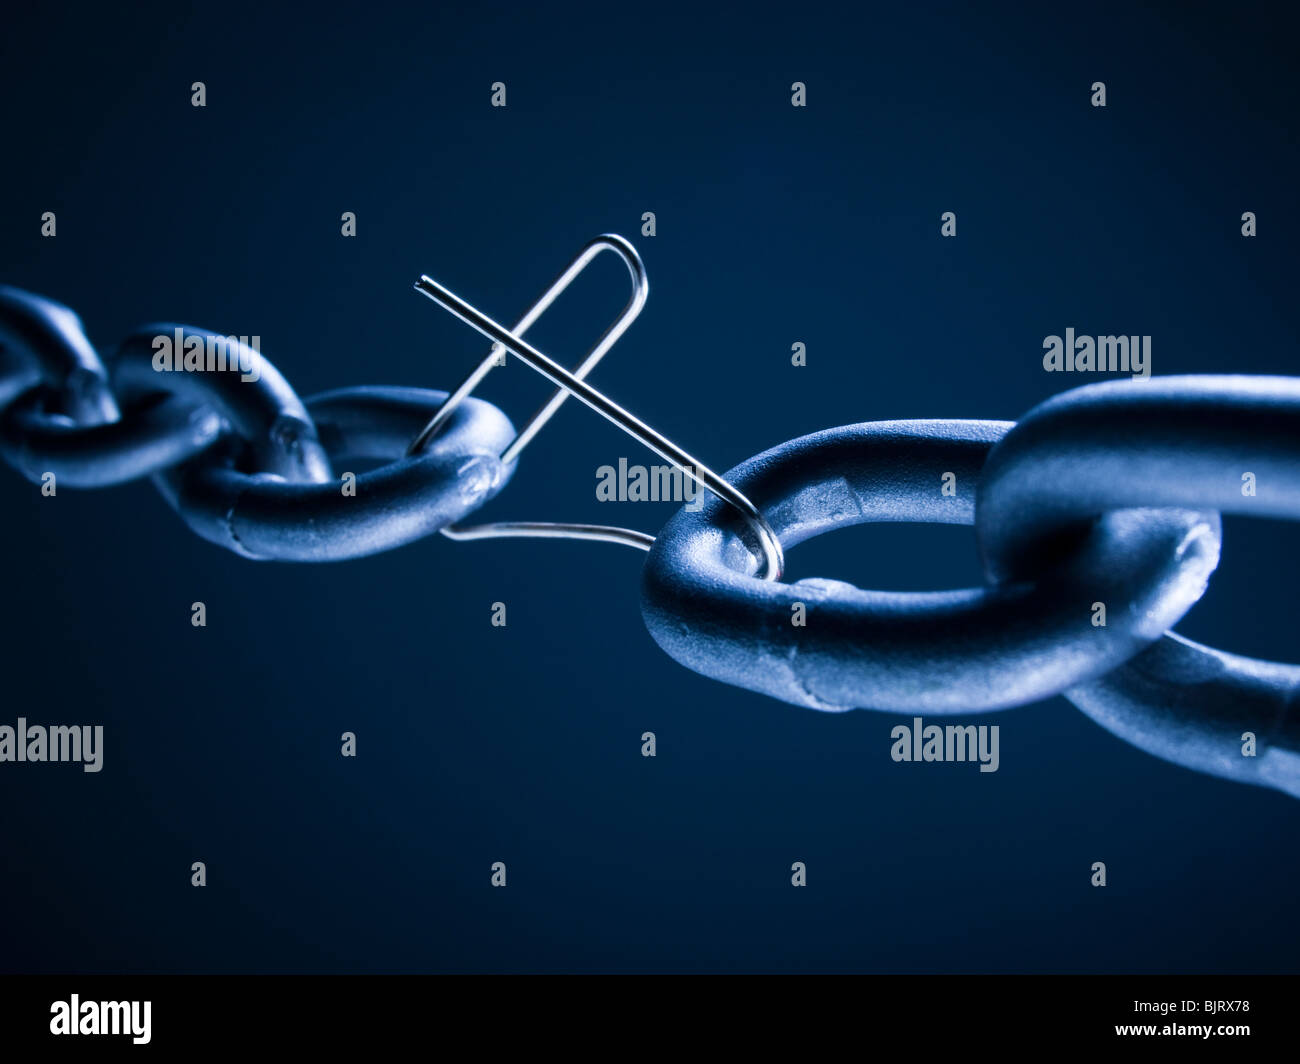 Chain linked with broken paper clip against blue background Stock Photo